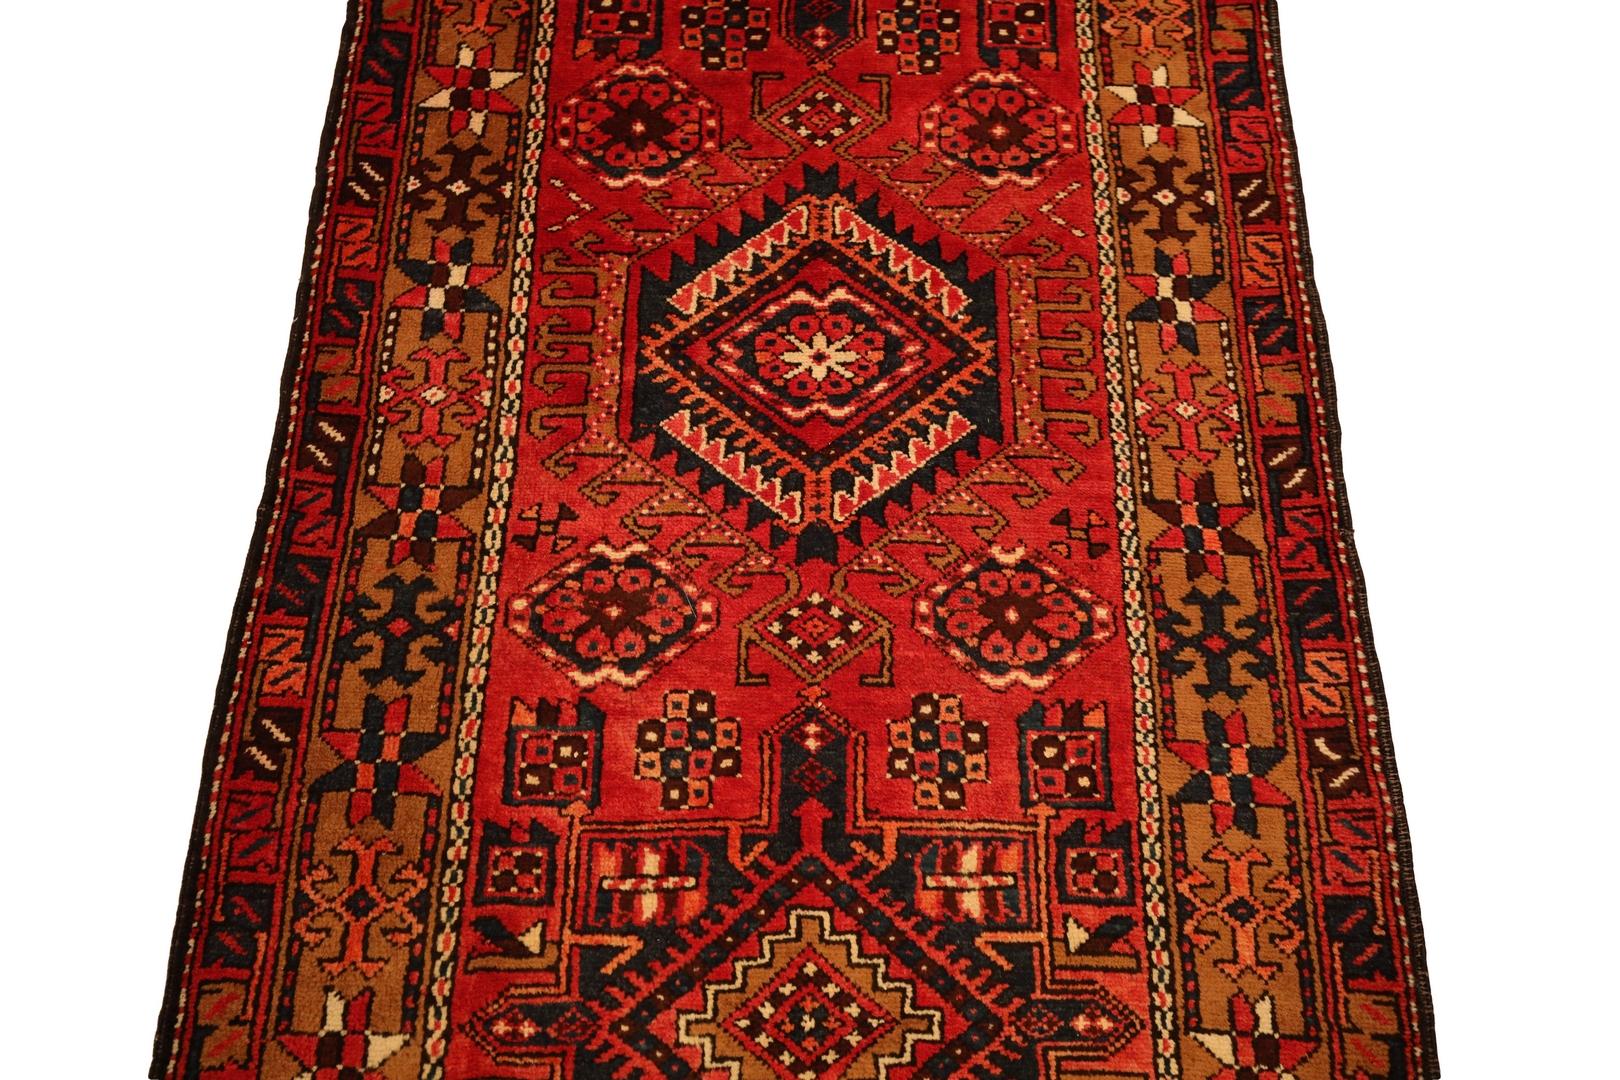 20th Century North-West Persian Vintage Runner - 3'3